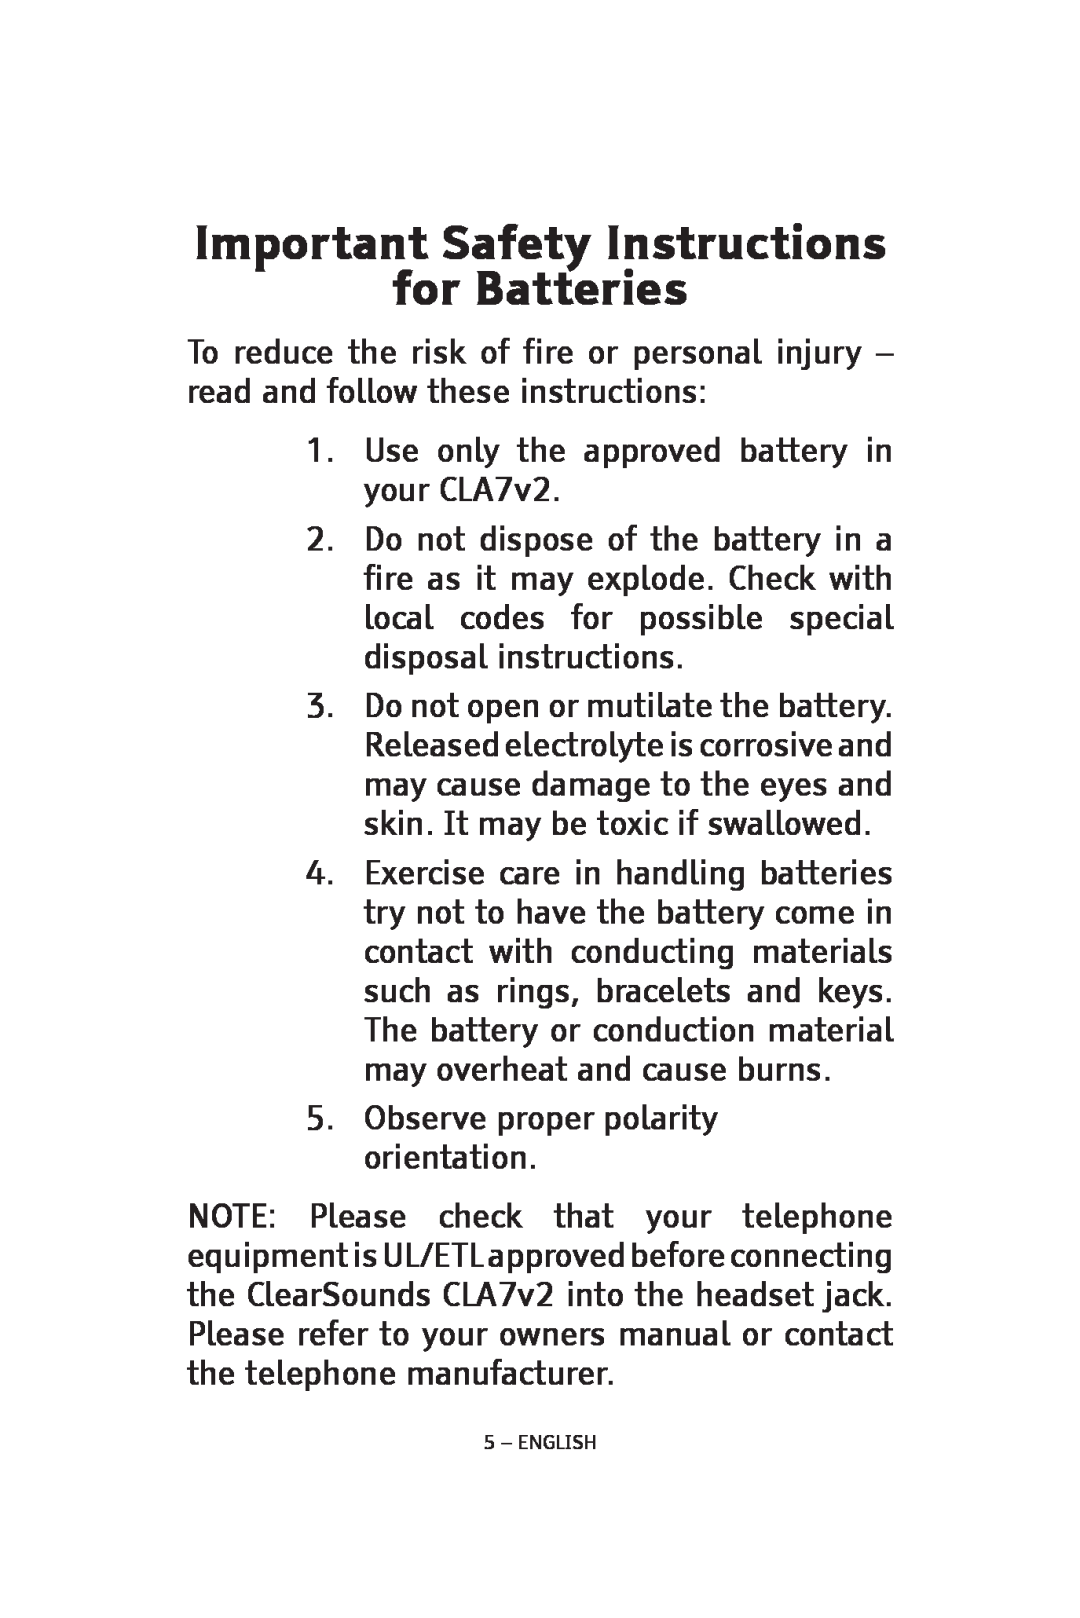 ClearSounds CLA7V2 manual Important Safety Instructions for Batteries 